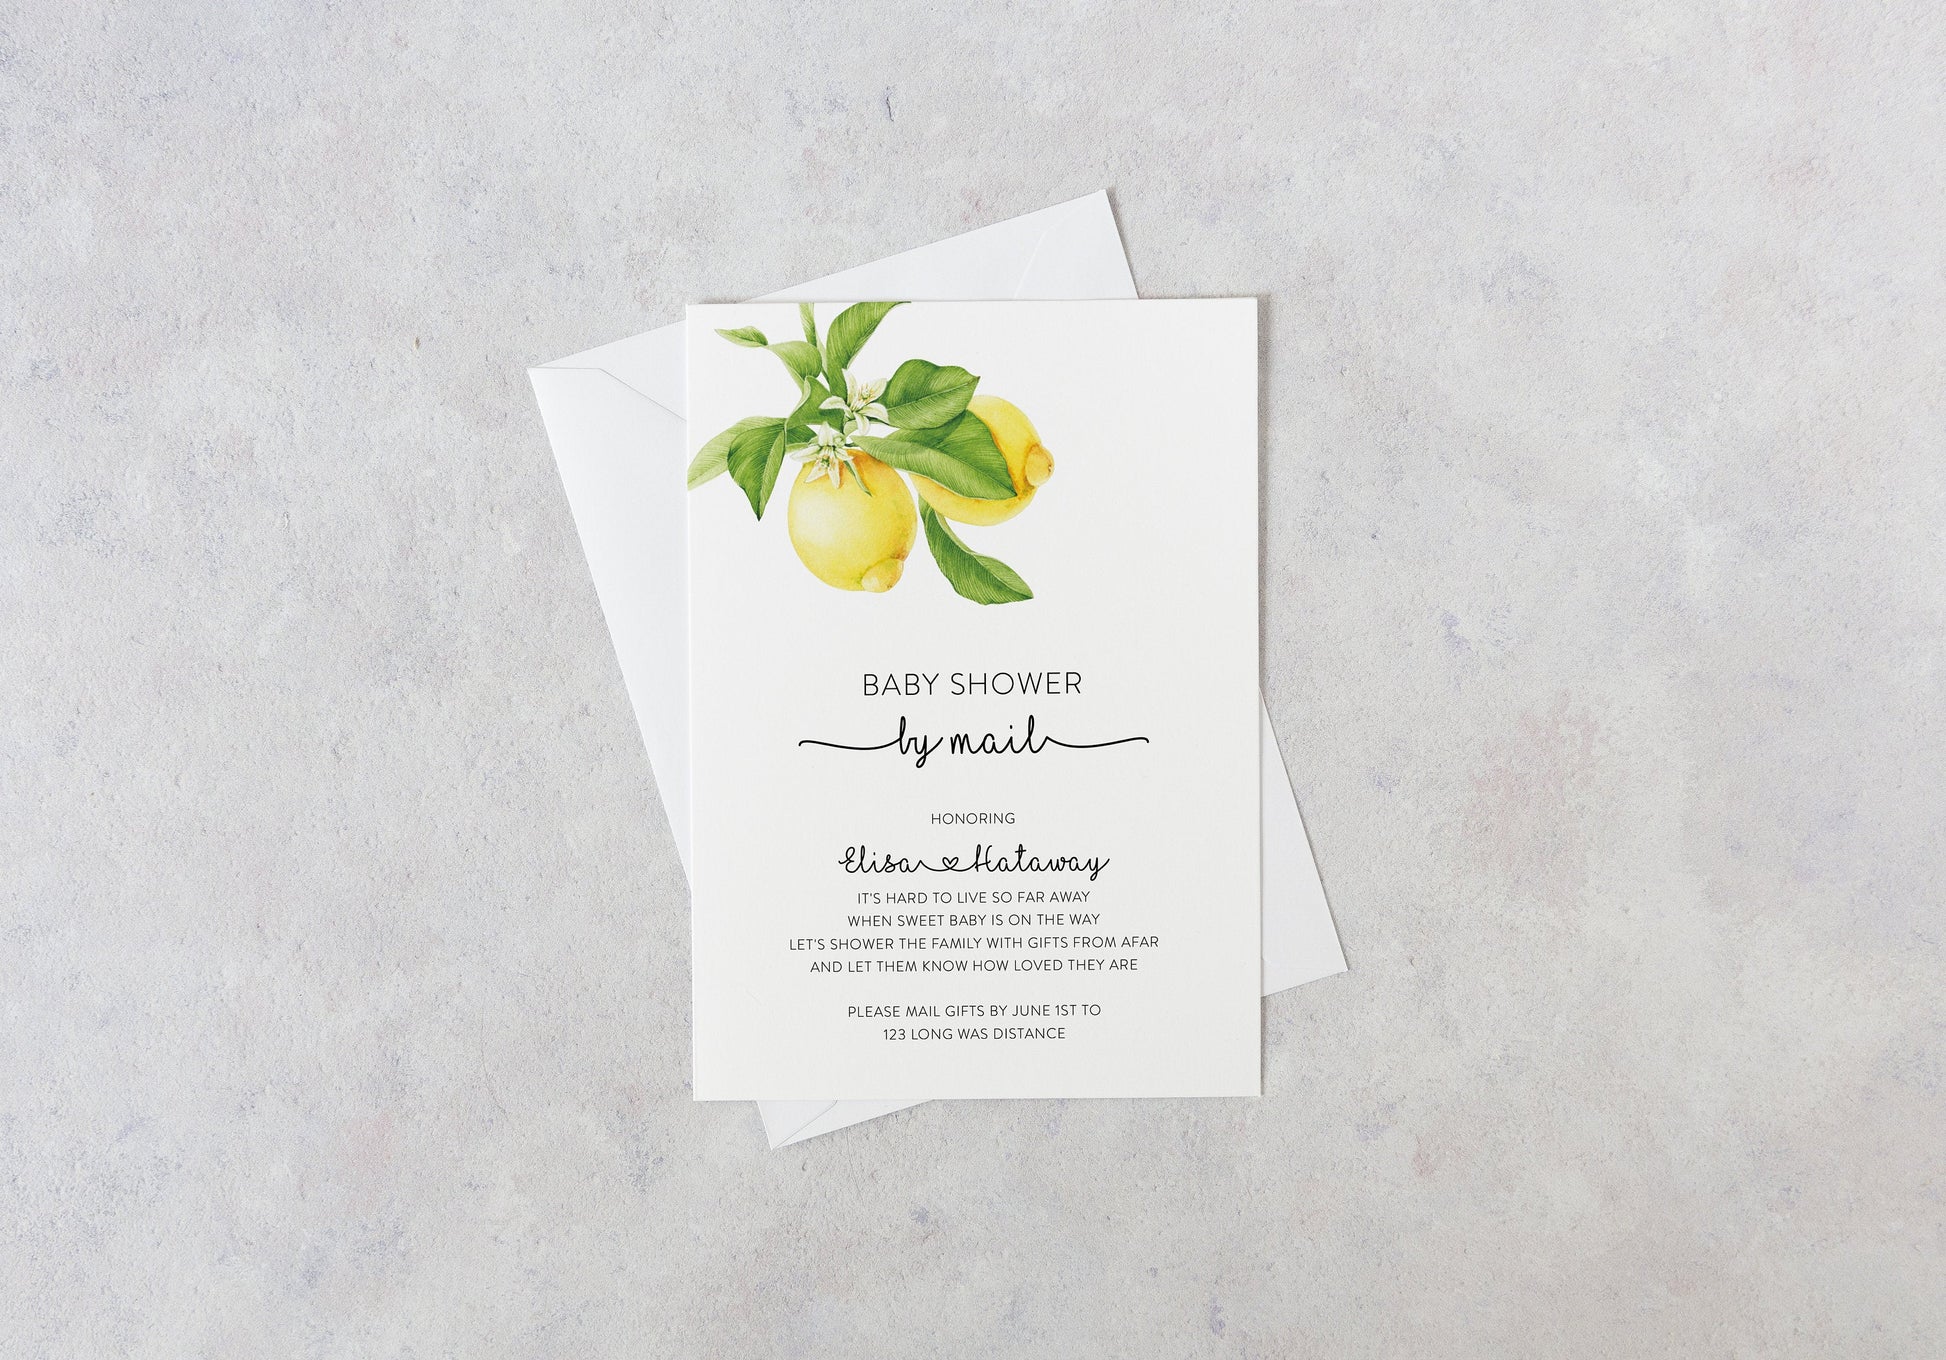 Lemon Shower by Mail Invitaion Template, Long Distance Baby Shower Invitations, Instant Download, Editable Baby Shower   -  Ariel  SAVVY PAPER CO